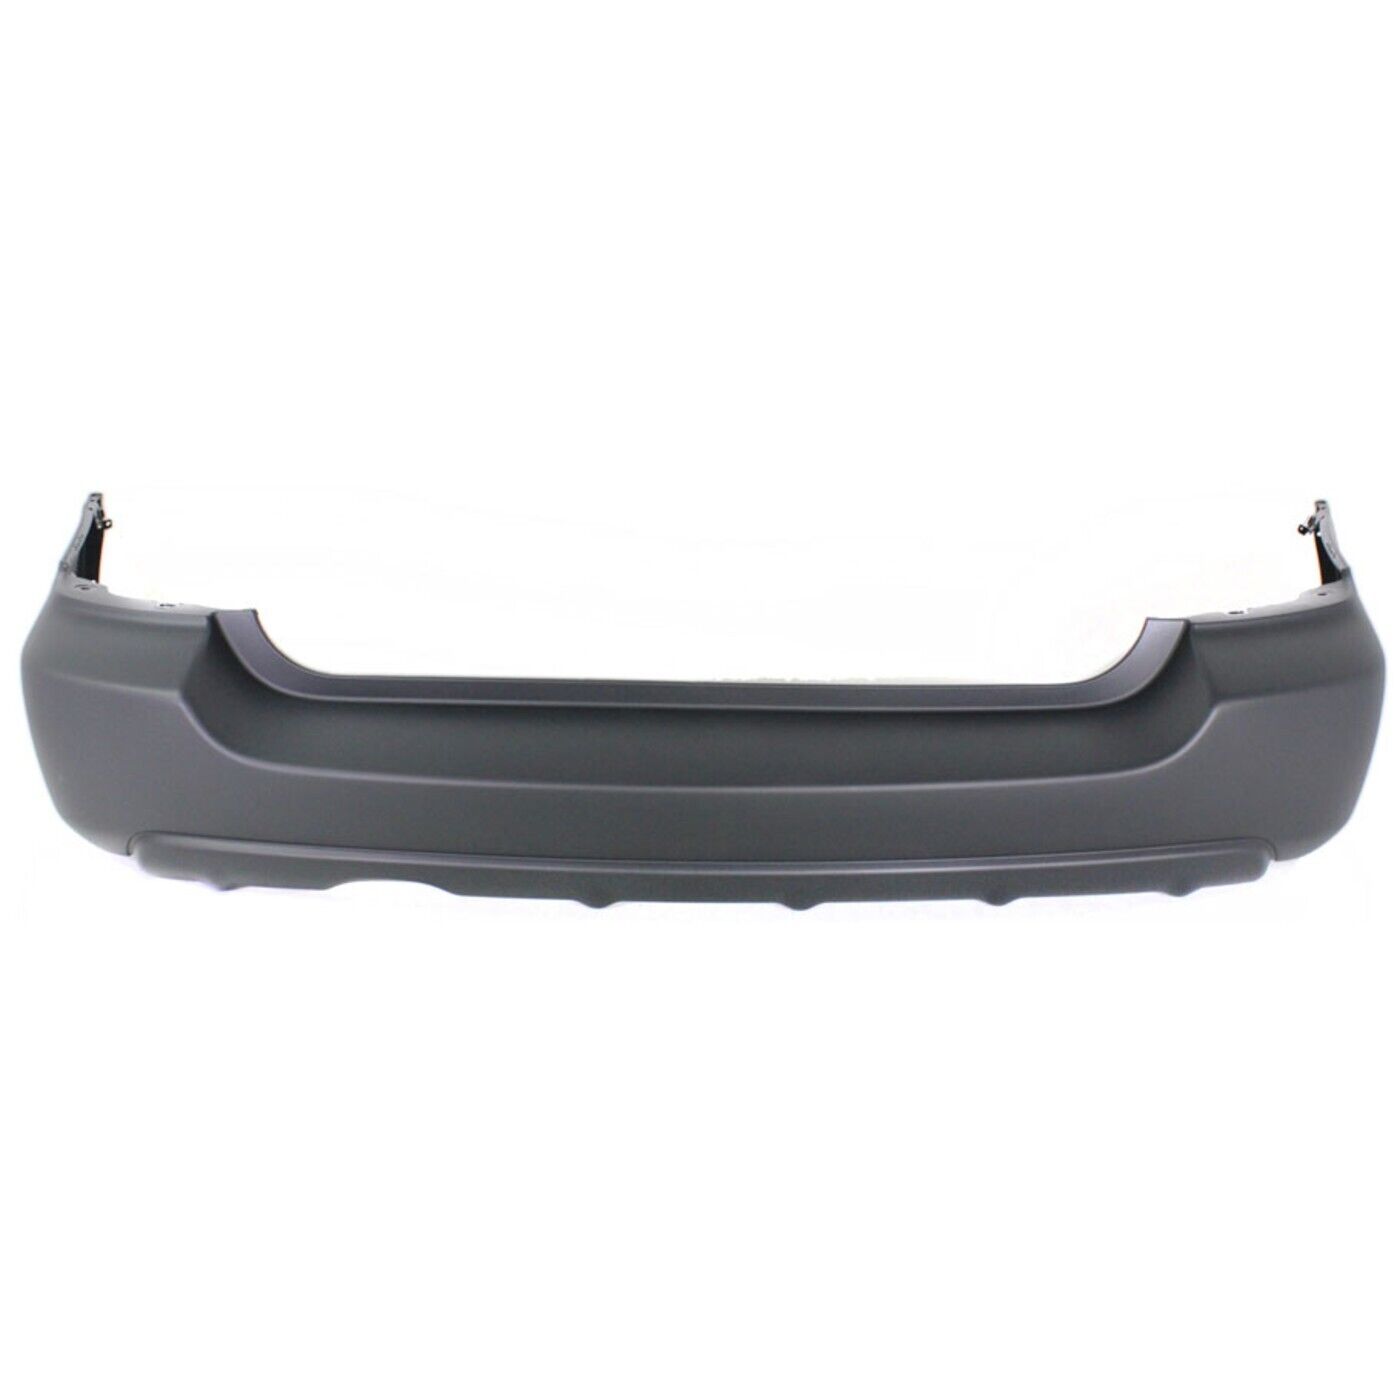 Rear Bumper Cover For 2003-2008 Subaru Forester Textured